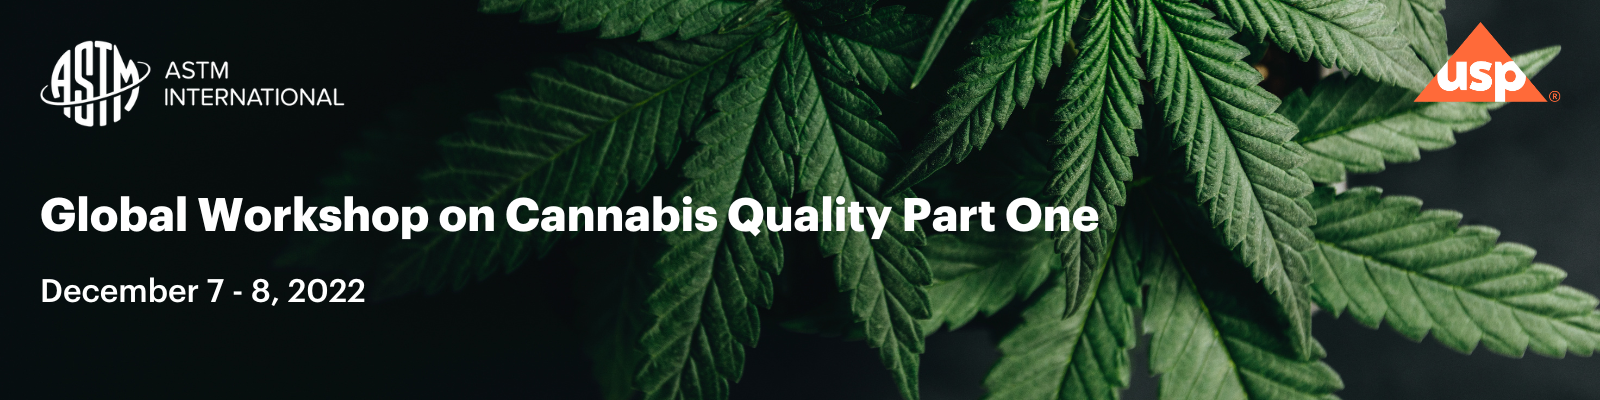 Global Workshop on Cannabis Quality Part One - December 7-8, 2022